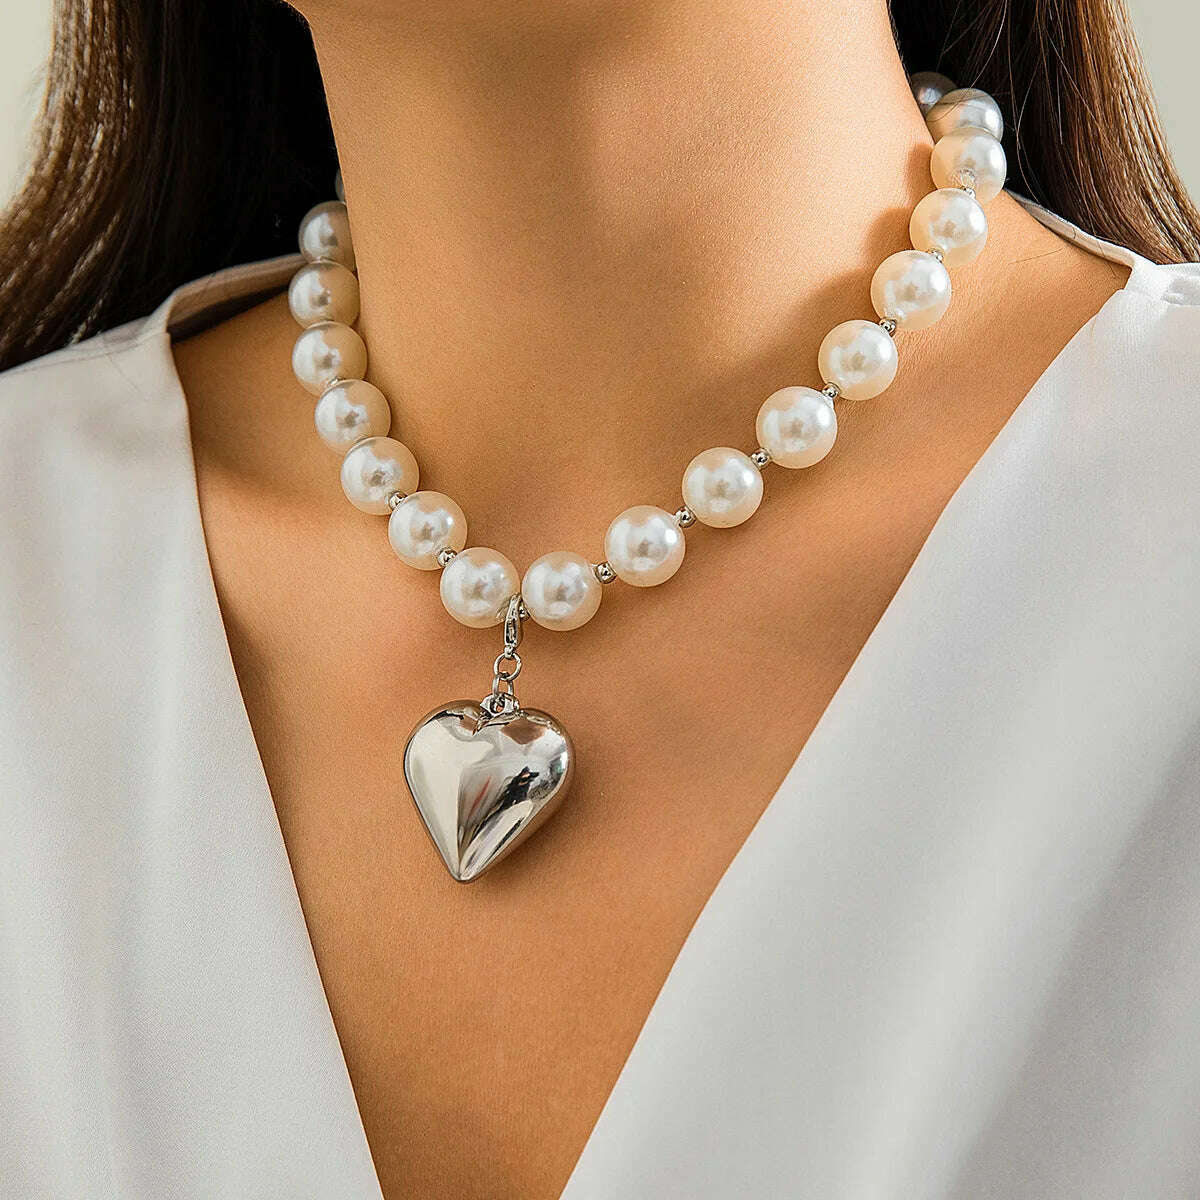 KIMLUD, DIEZI Exaggerated CCB Heart Pendant Necklace Women Party Vintage Punk Fashion Pearl Beads Choker Statement Collar Neck Jewelry, silver 6215, KIMLUD Women's Clothes